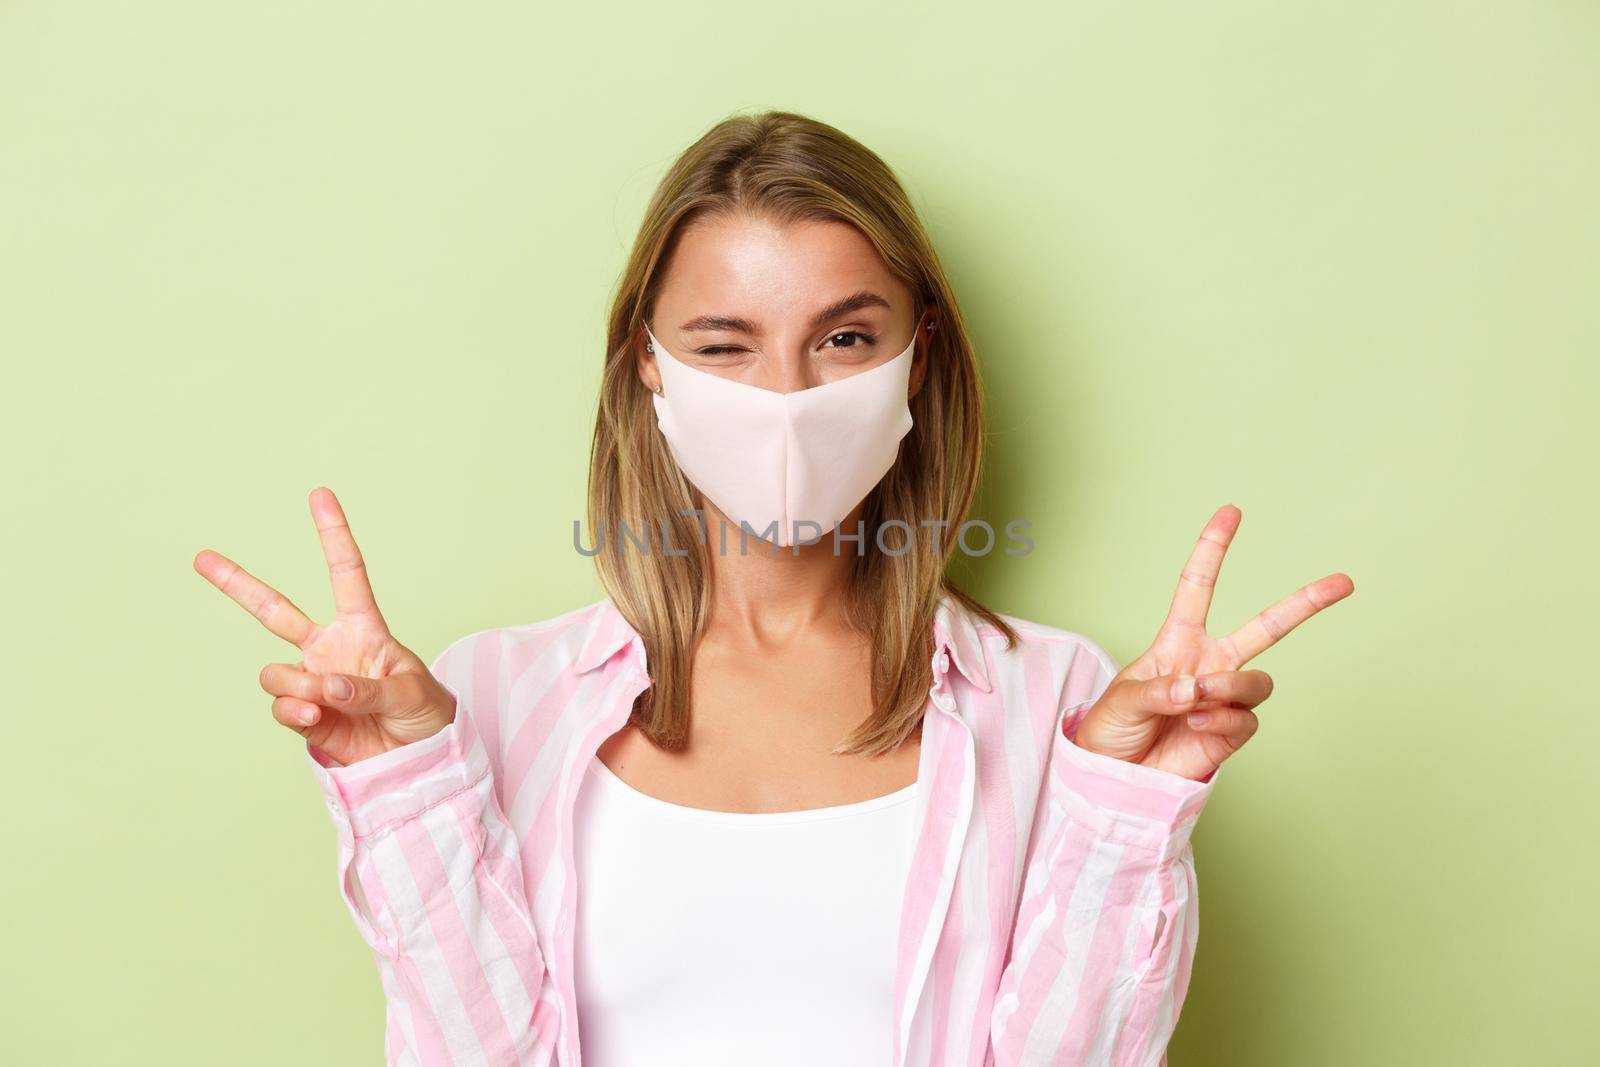 Concept of quarantine, coronavirus and lifestyle. Close-up of sassy blond girl in pink shirt and face mask, showing peace signs and winking silly, standing over green background.